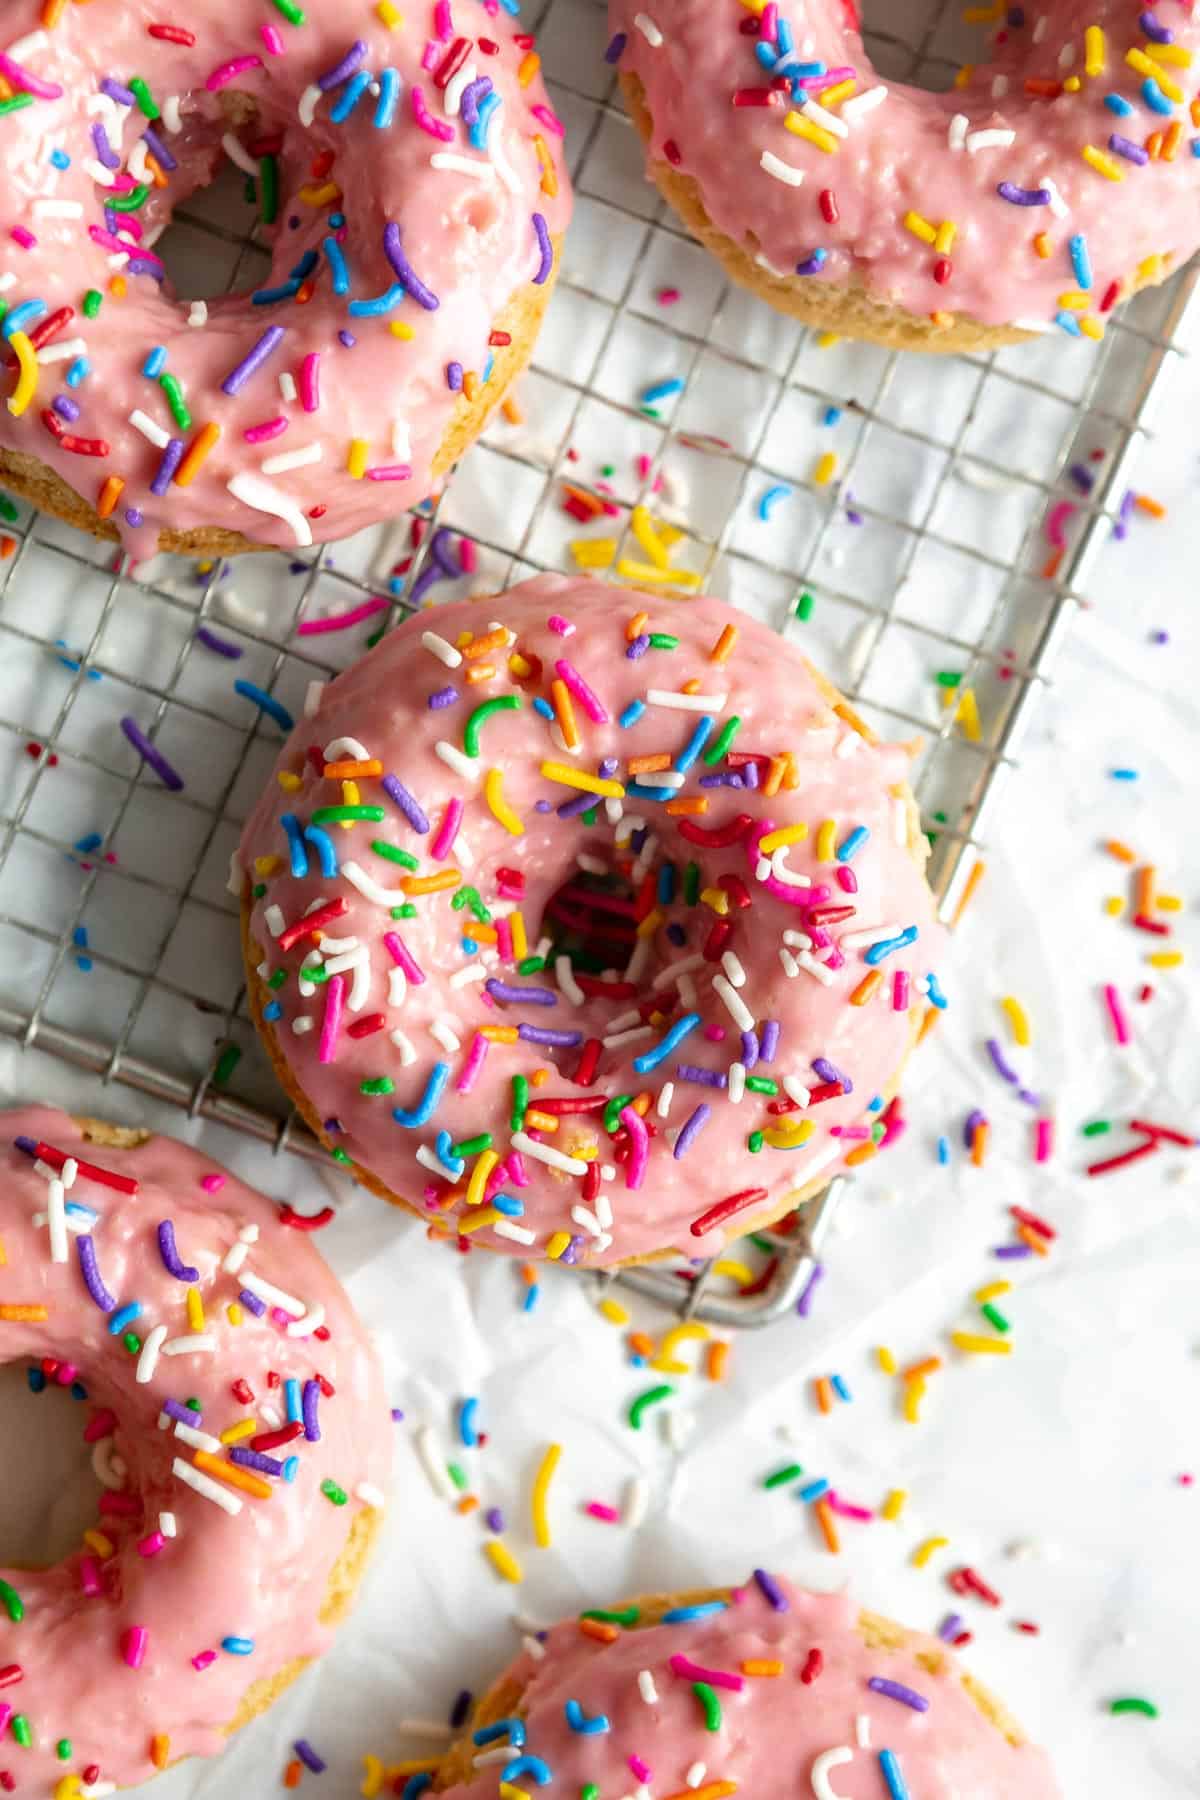 gluten free baked donuts with strawberry glaze and sprinkles on top